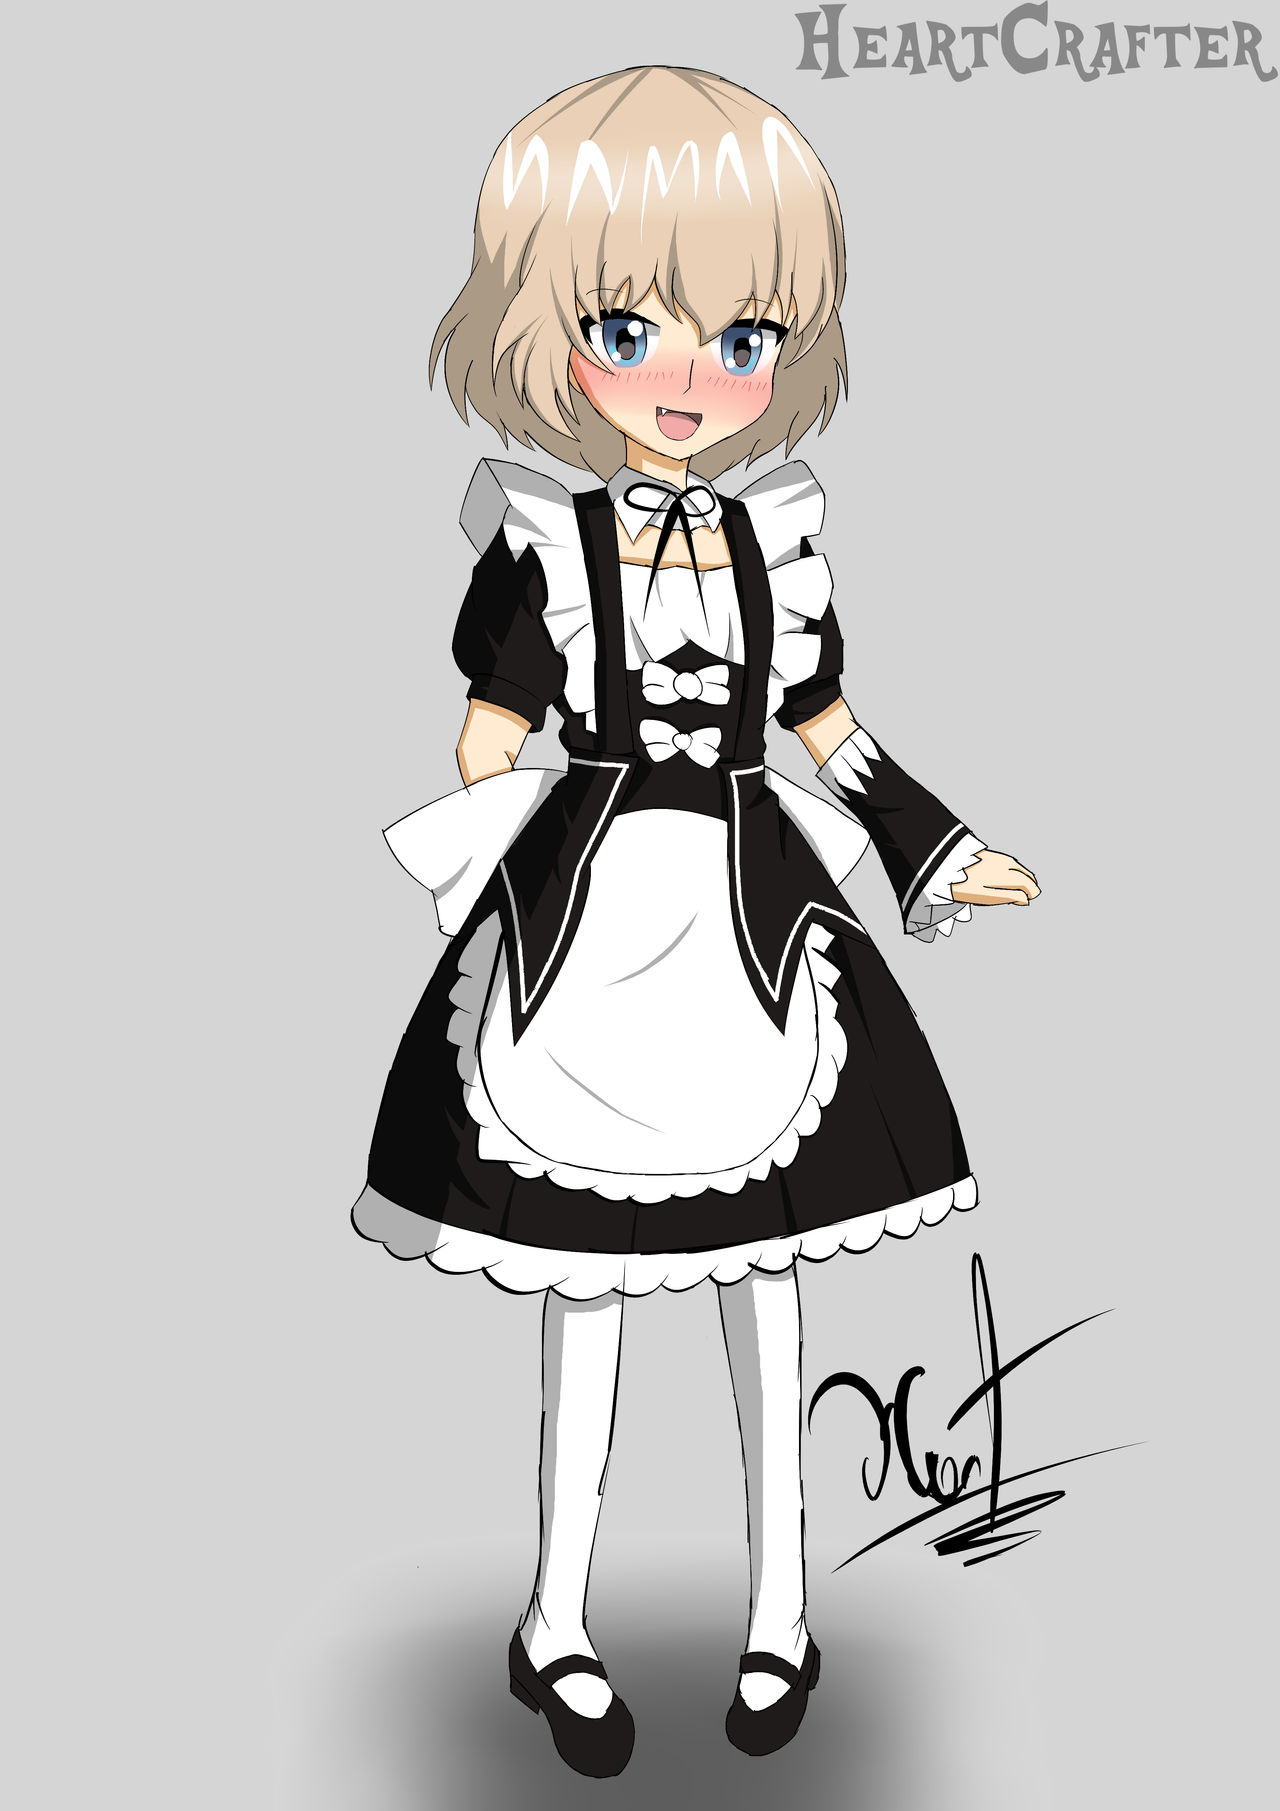 Katyusha In the maid outfit by HeartCrafter on DeviantArt